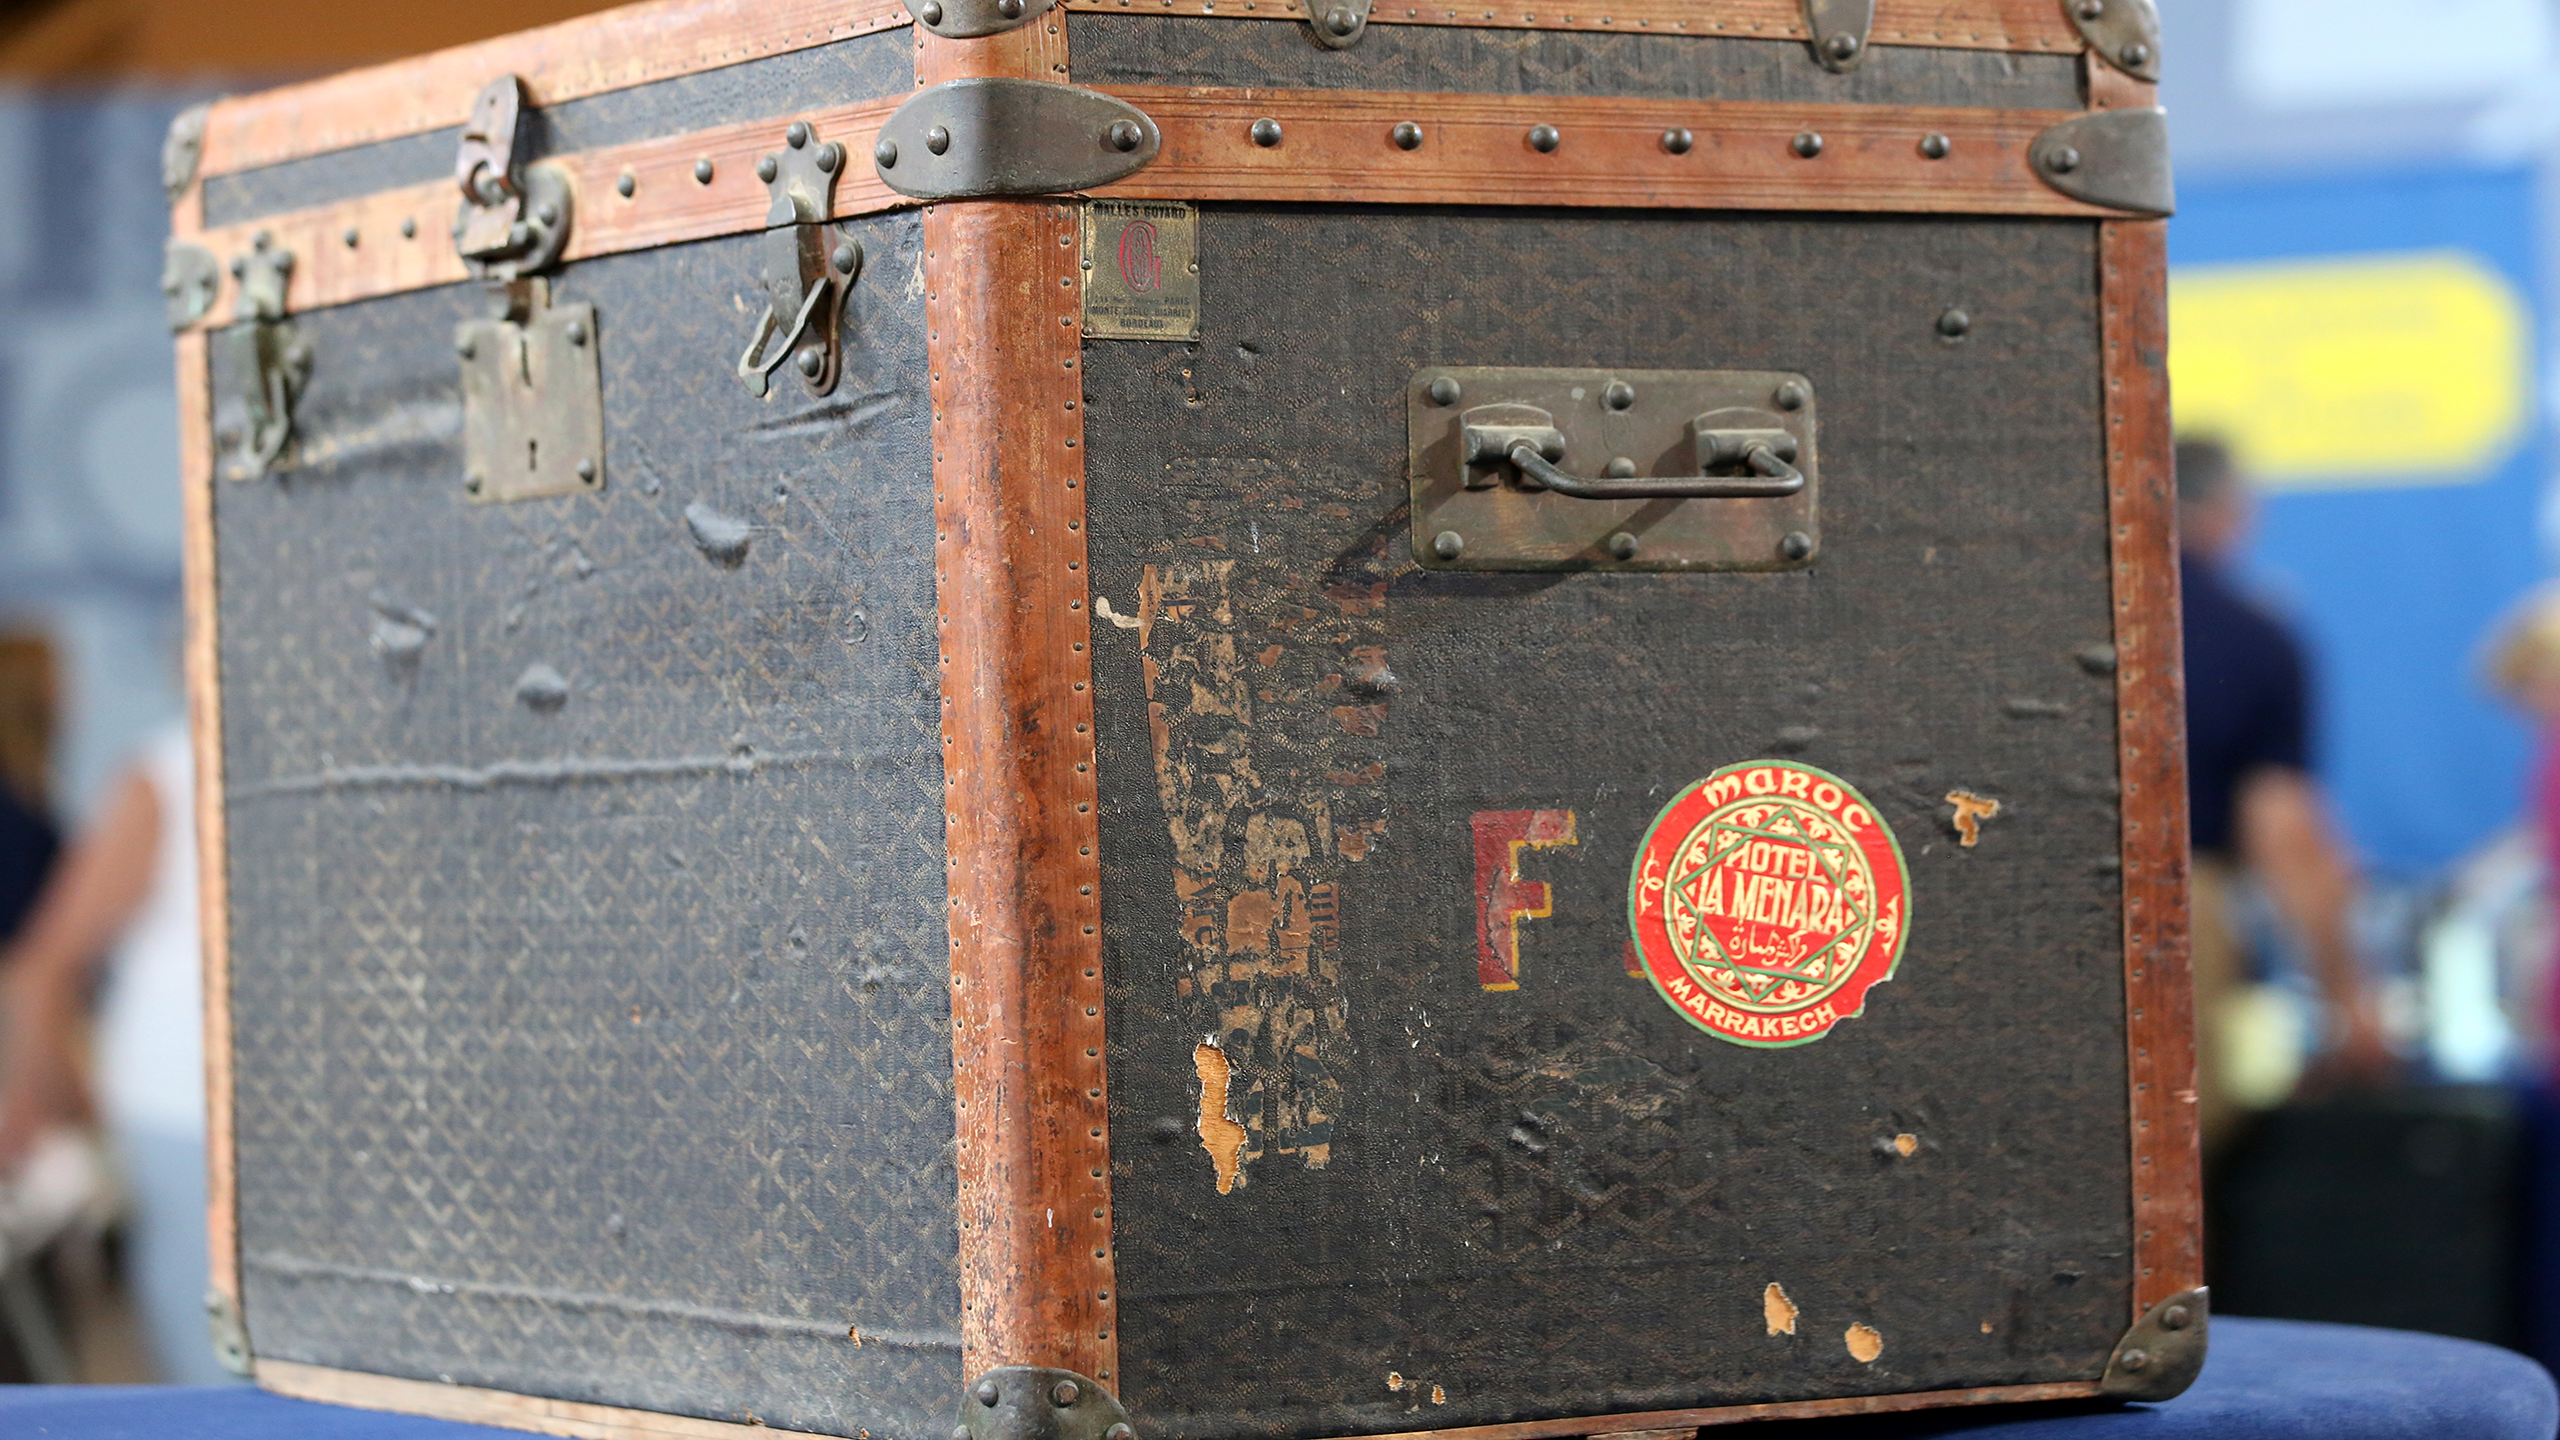 Louis Vuitton suitcase 1950 - THE HOUSE OF WAUW